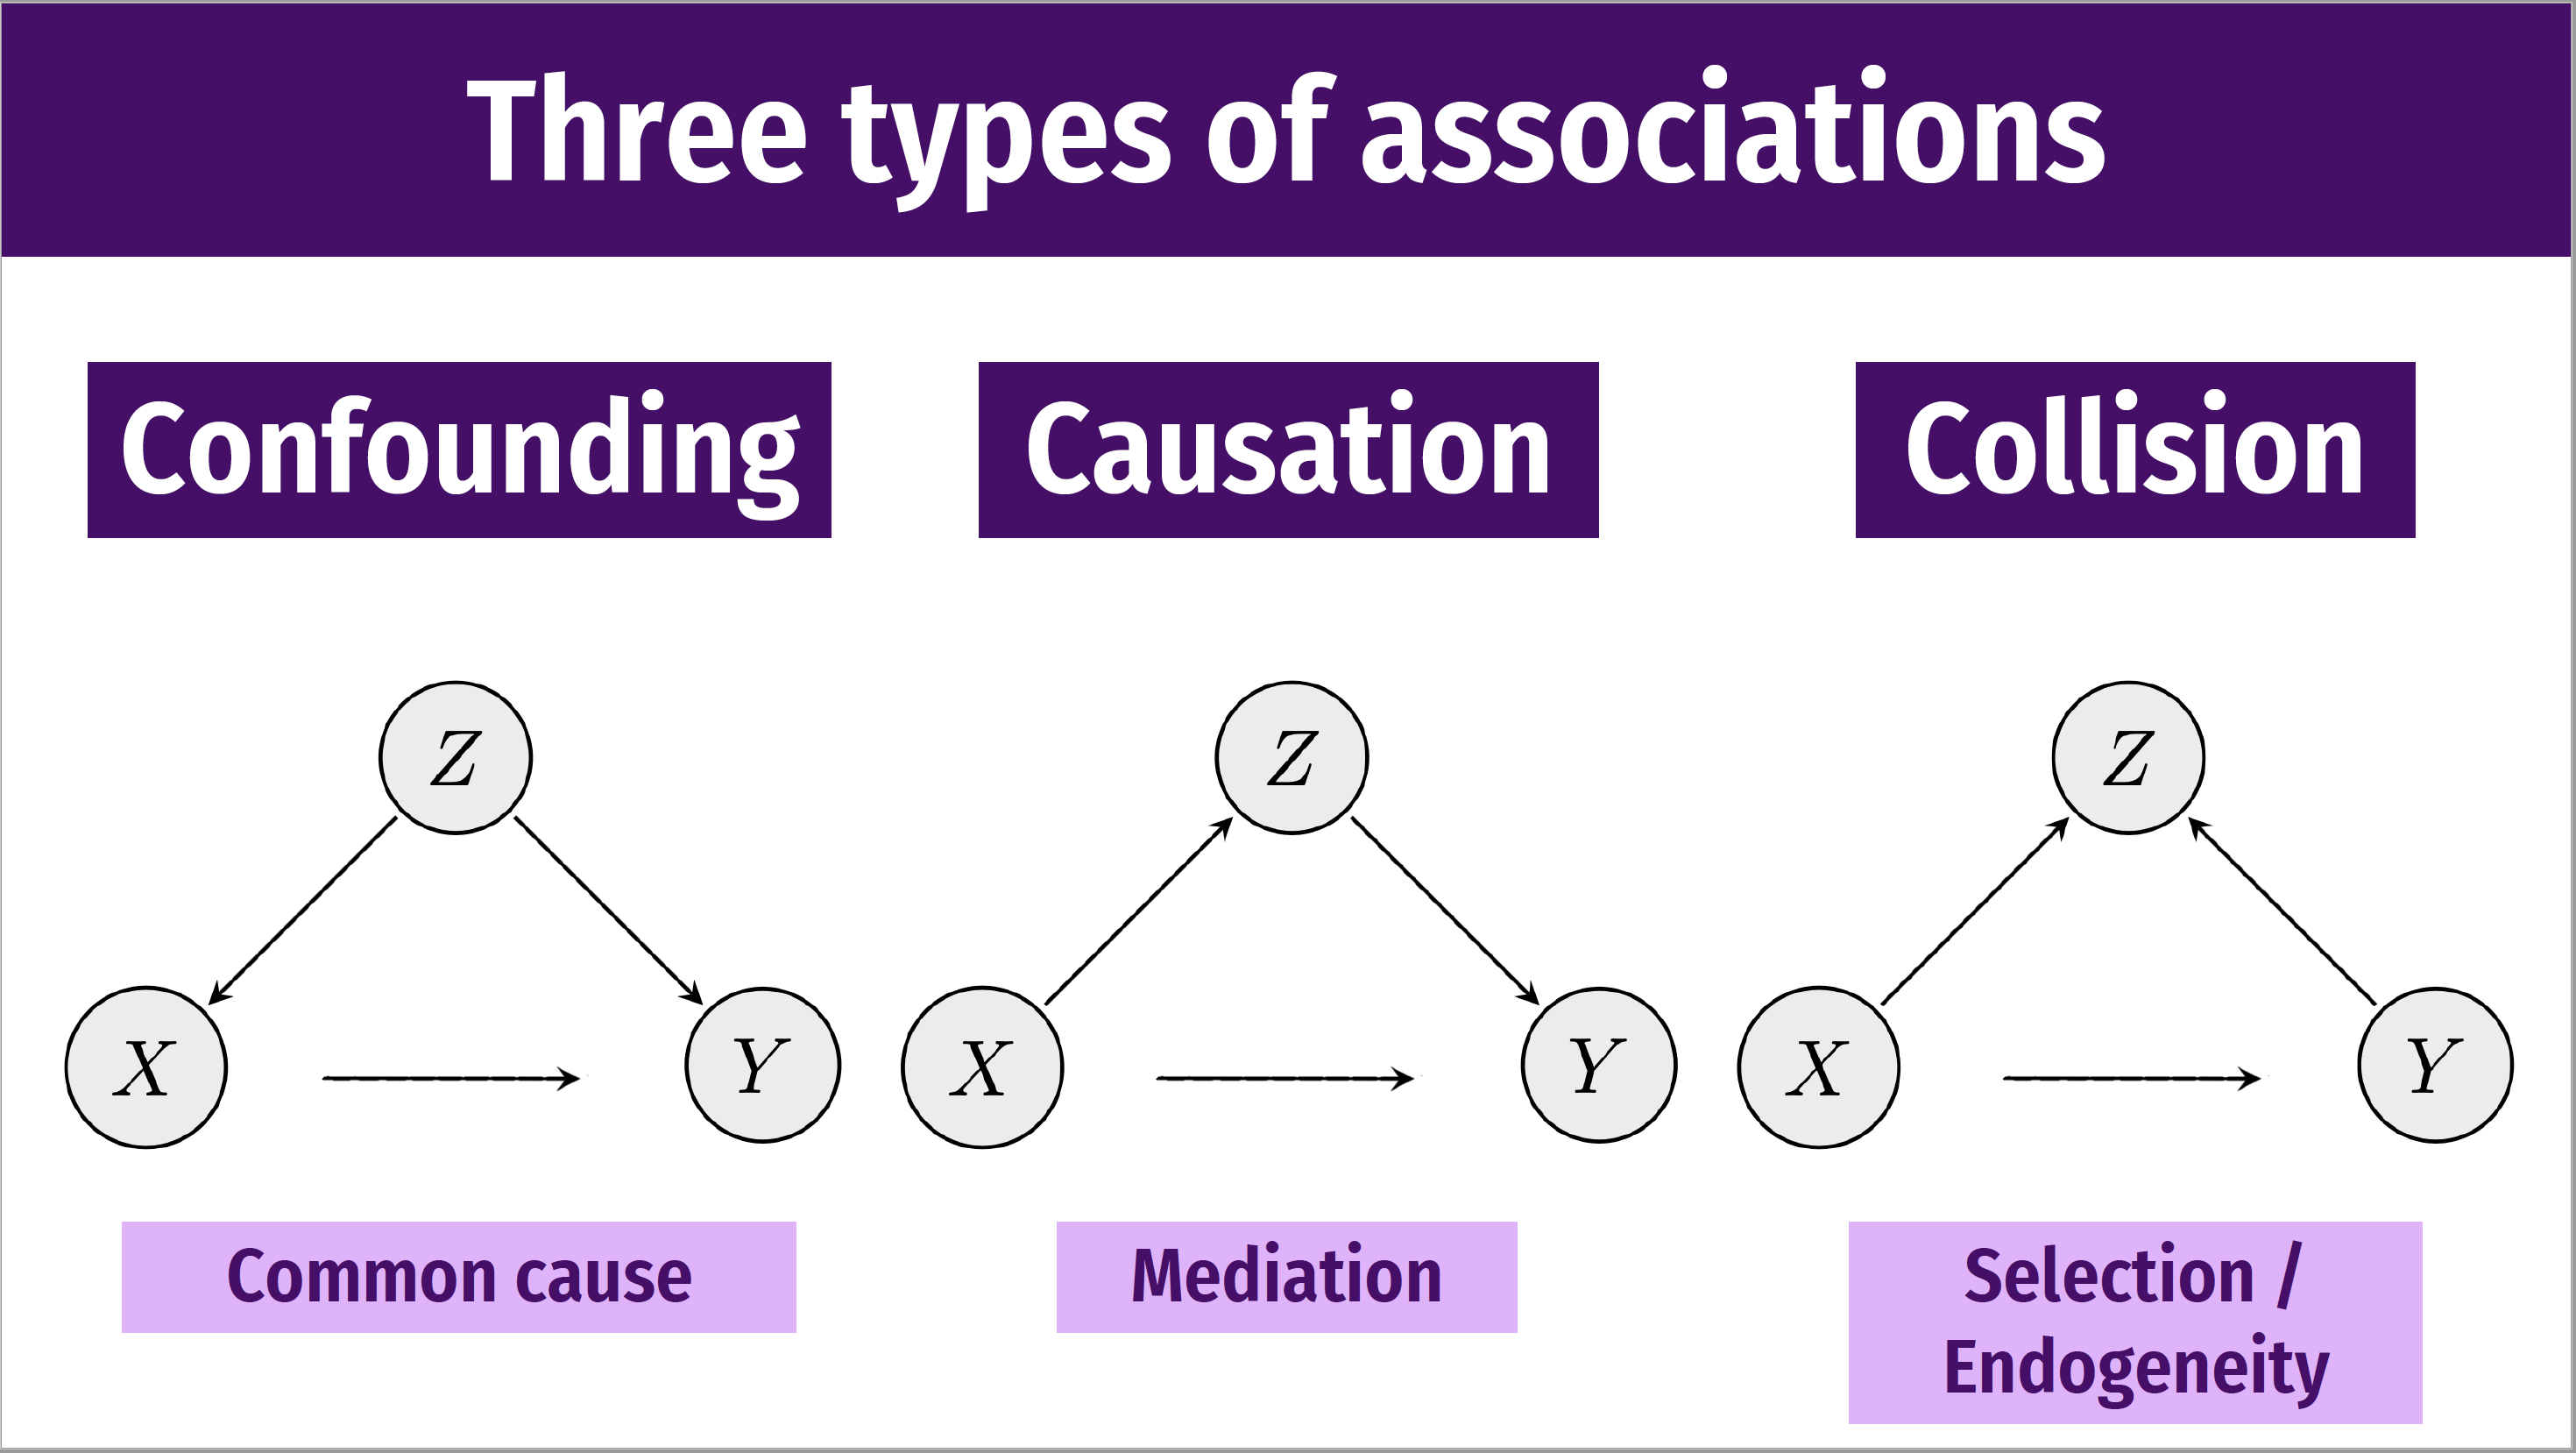 Types of associations